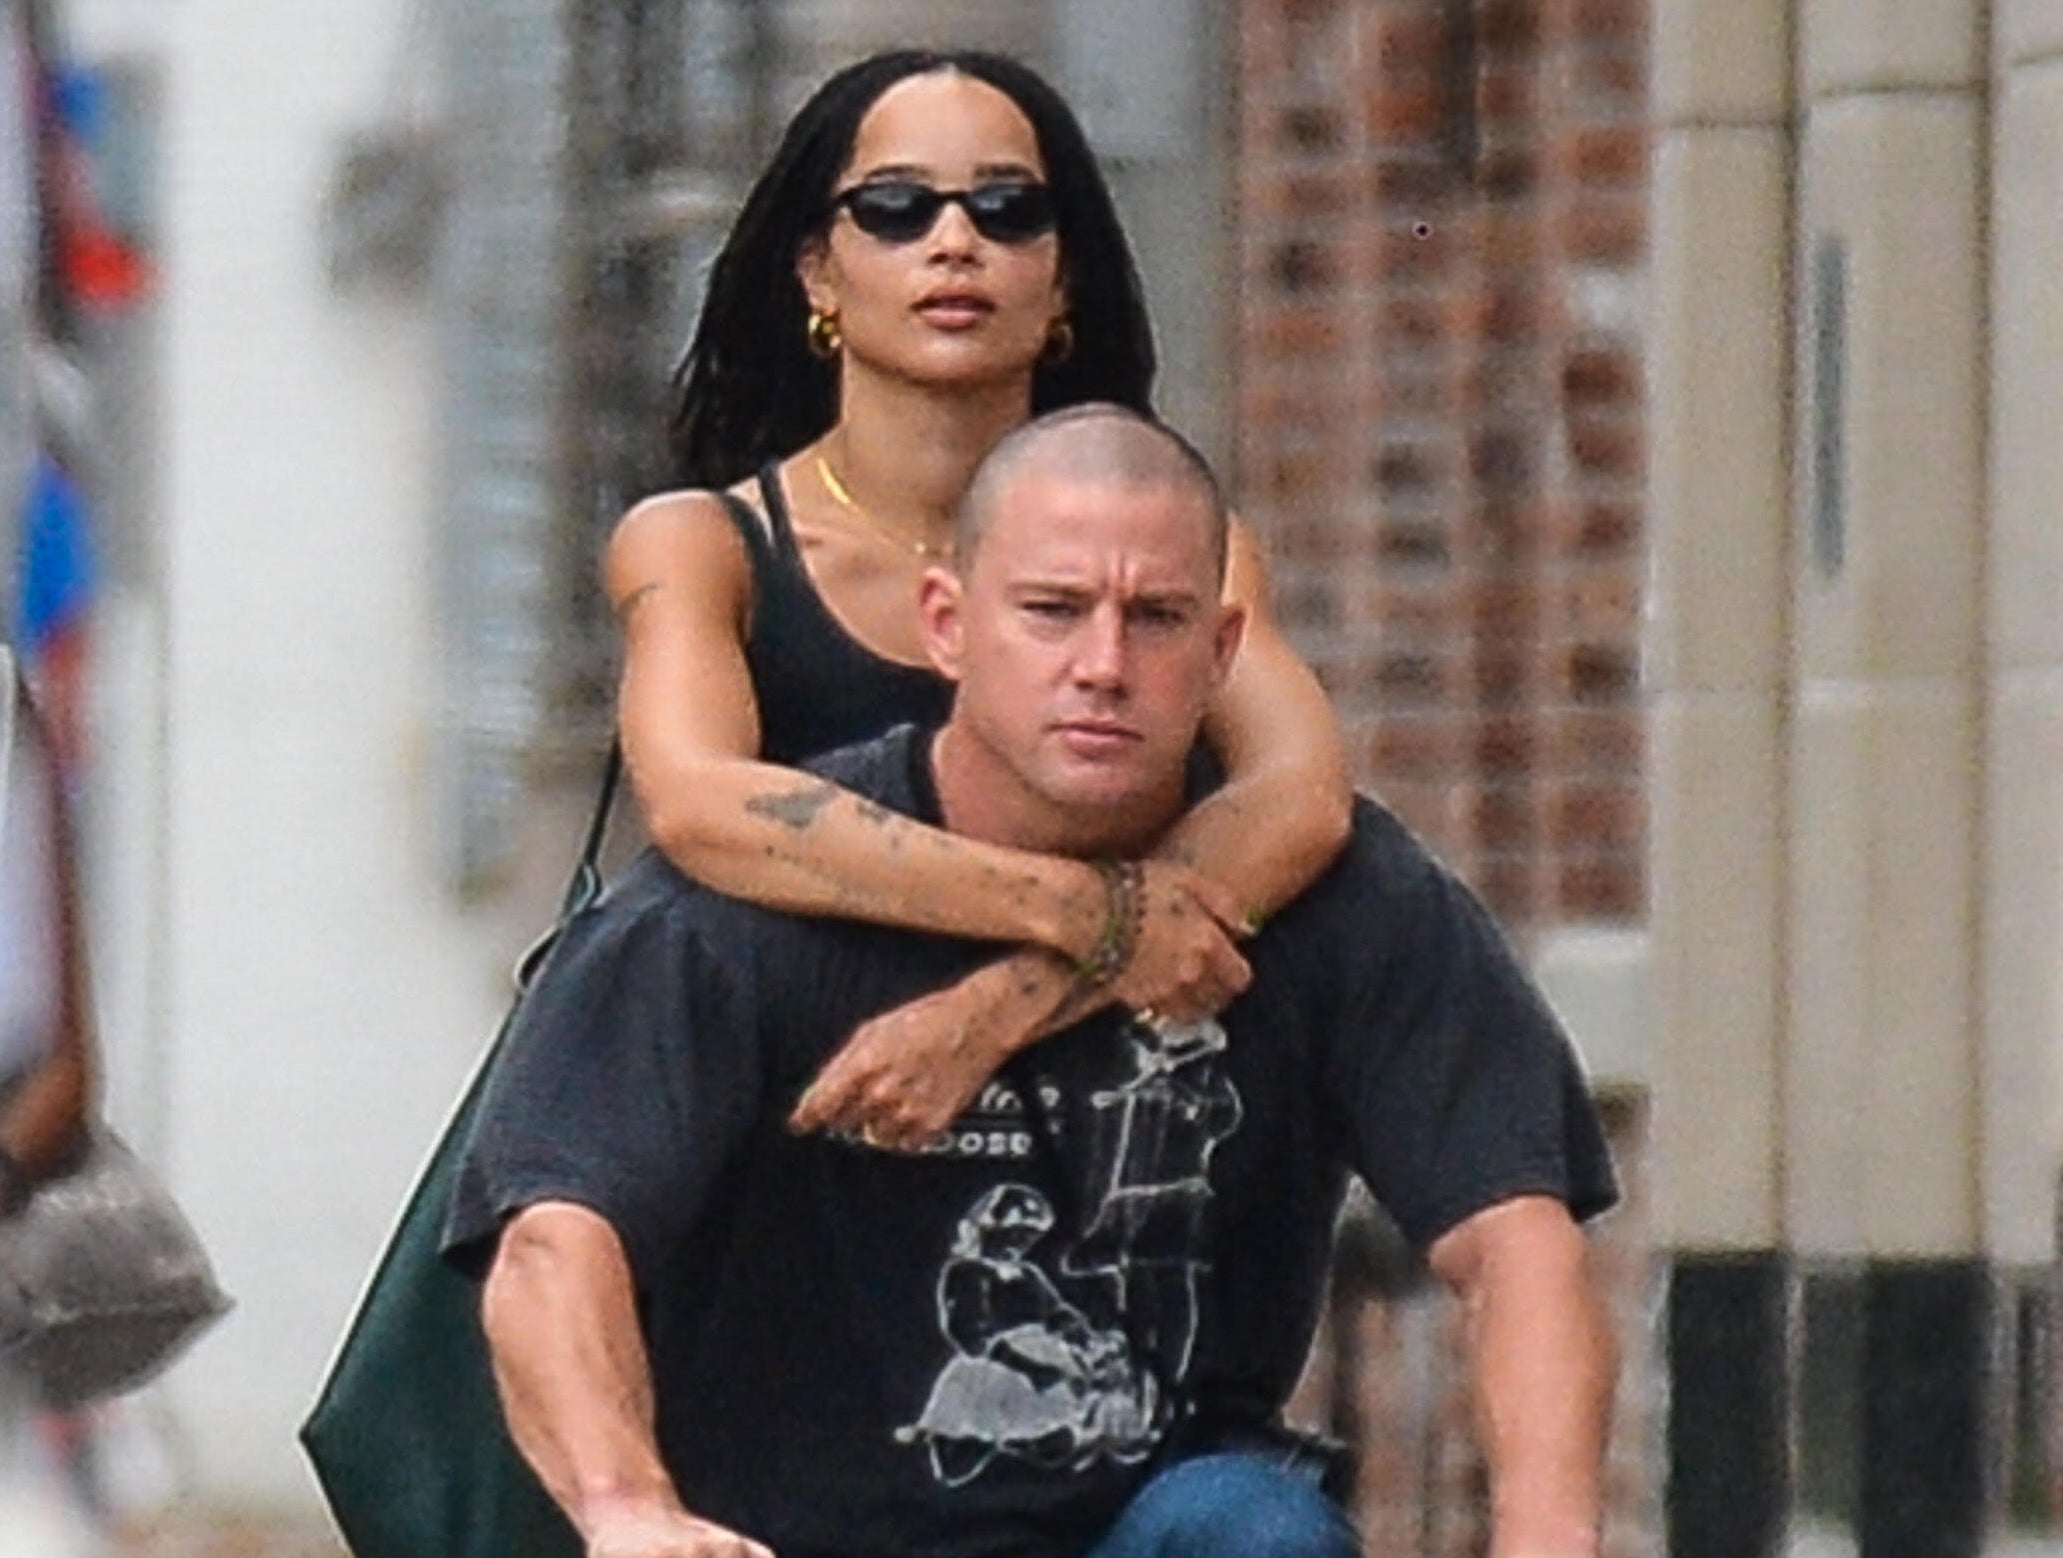 A closeup of Channing and Zoe on the bike